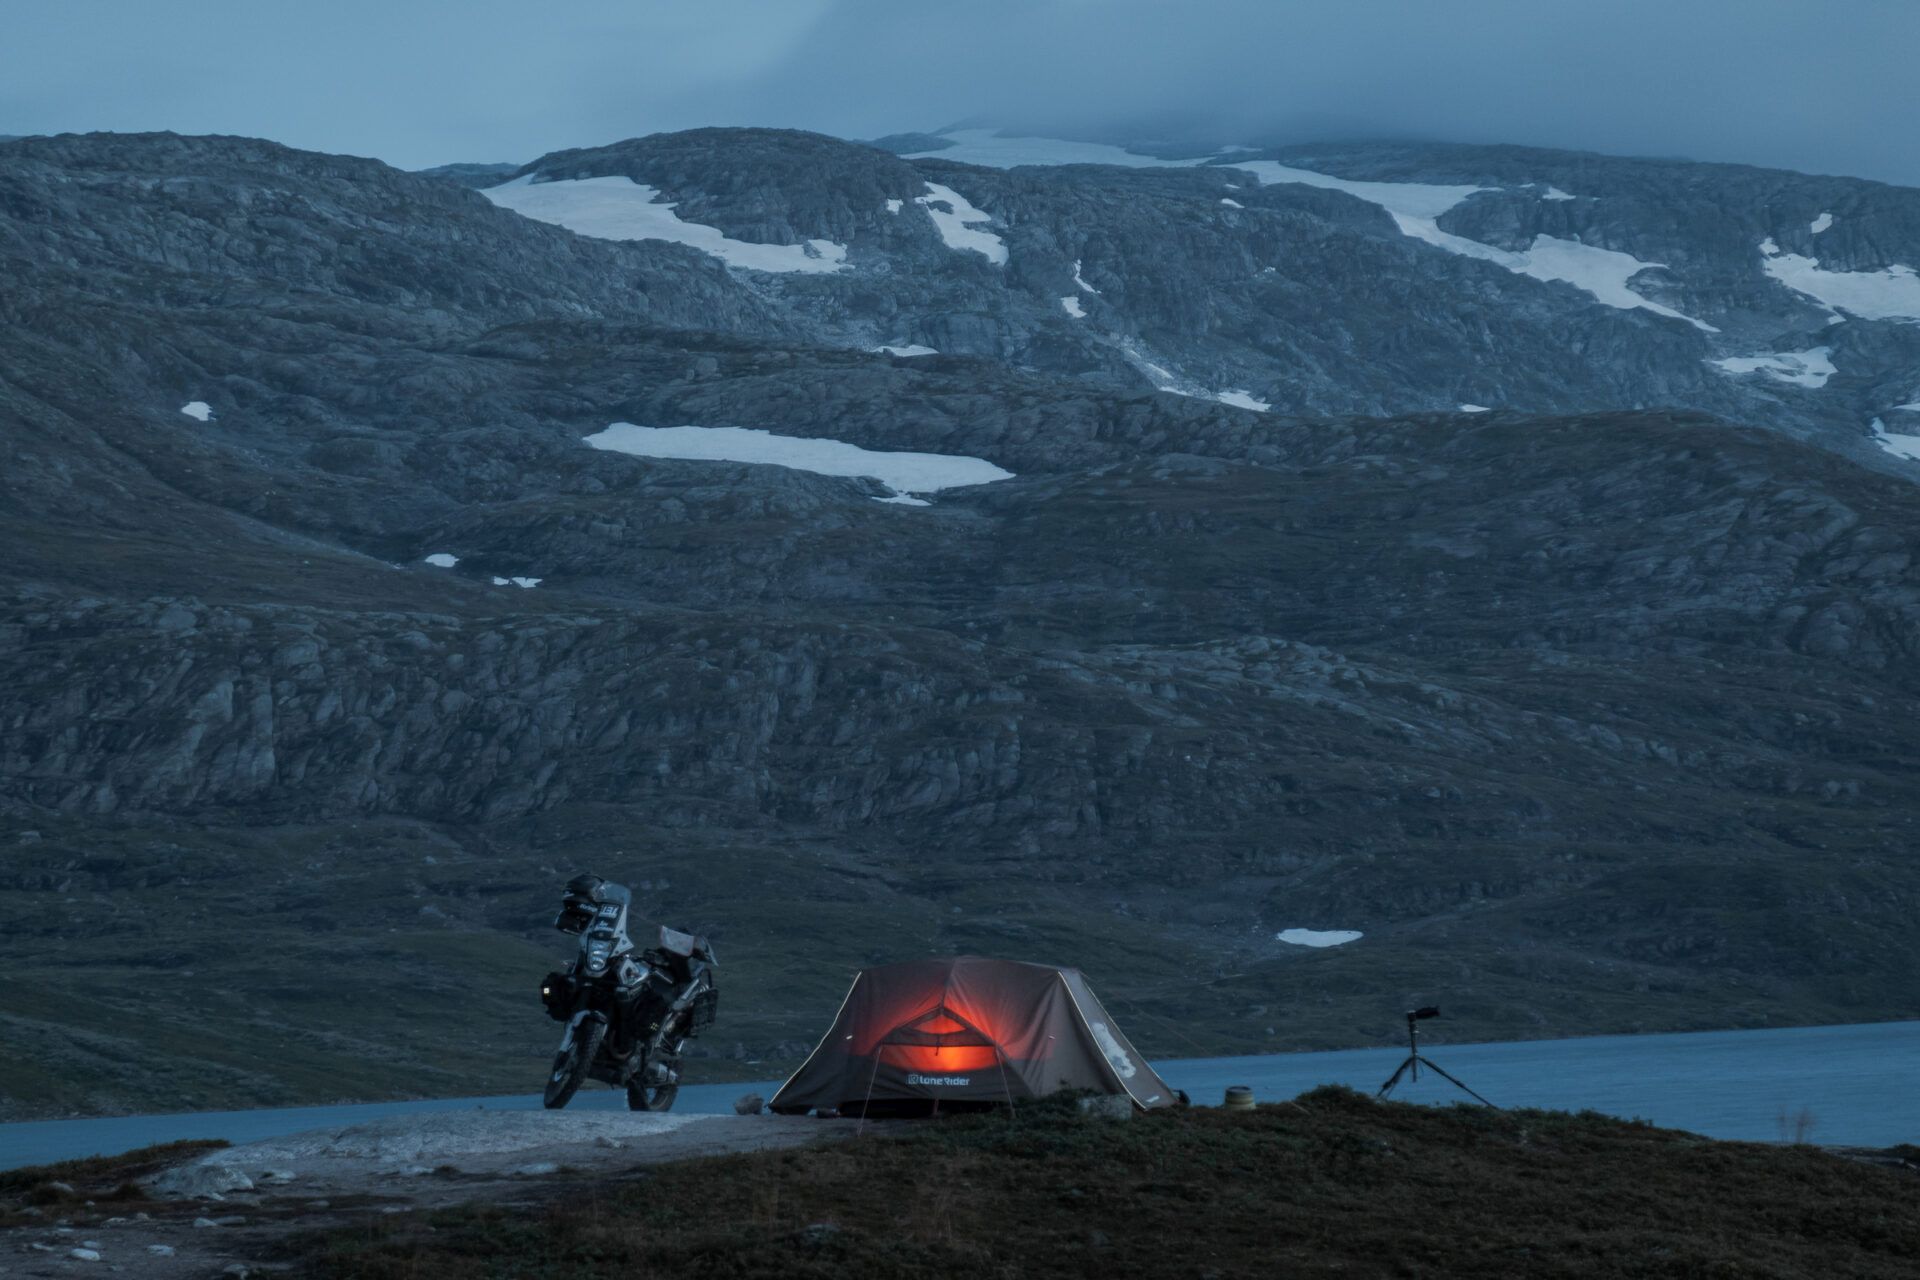 Norway night tent and motorcycle